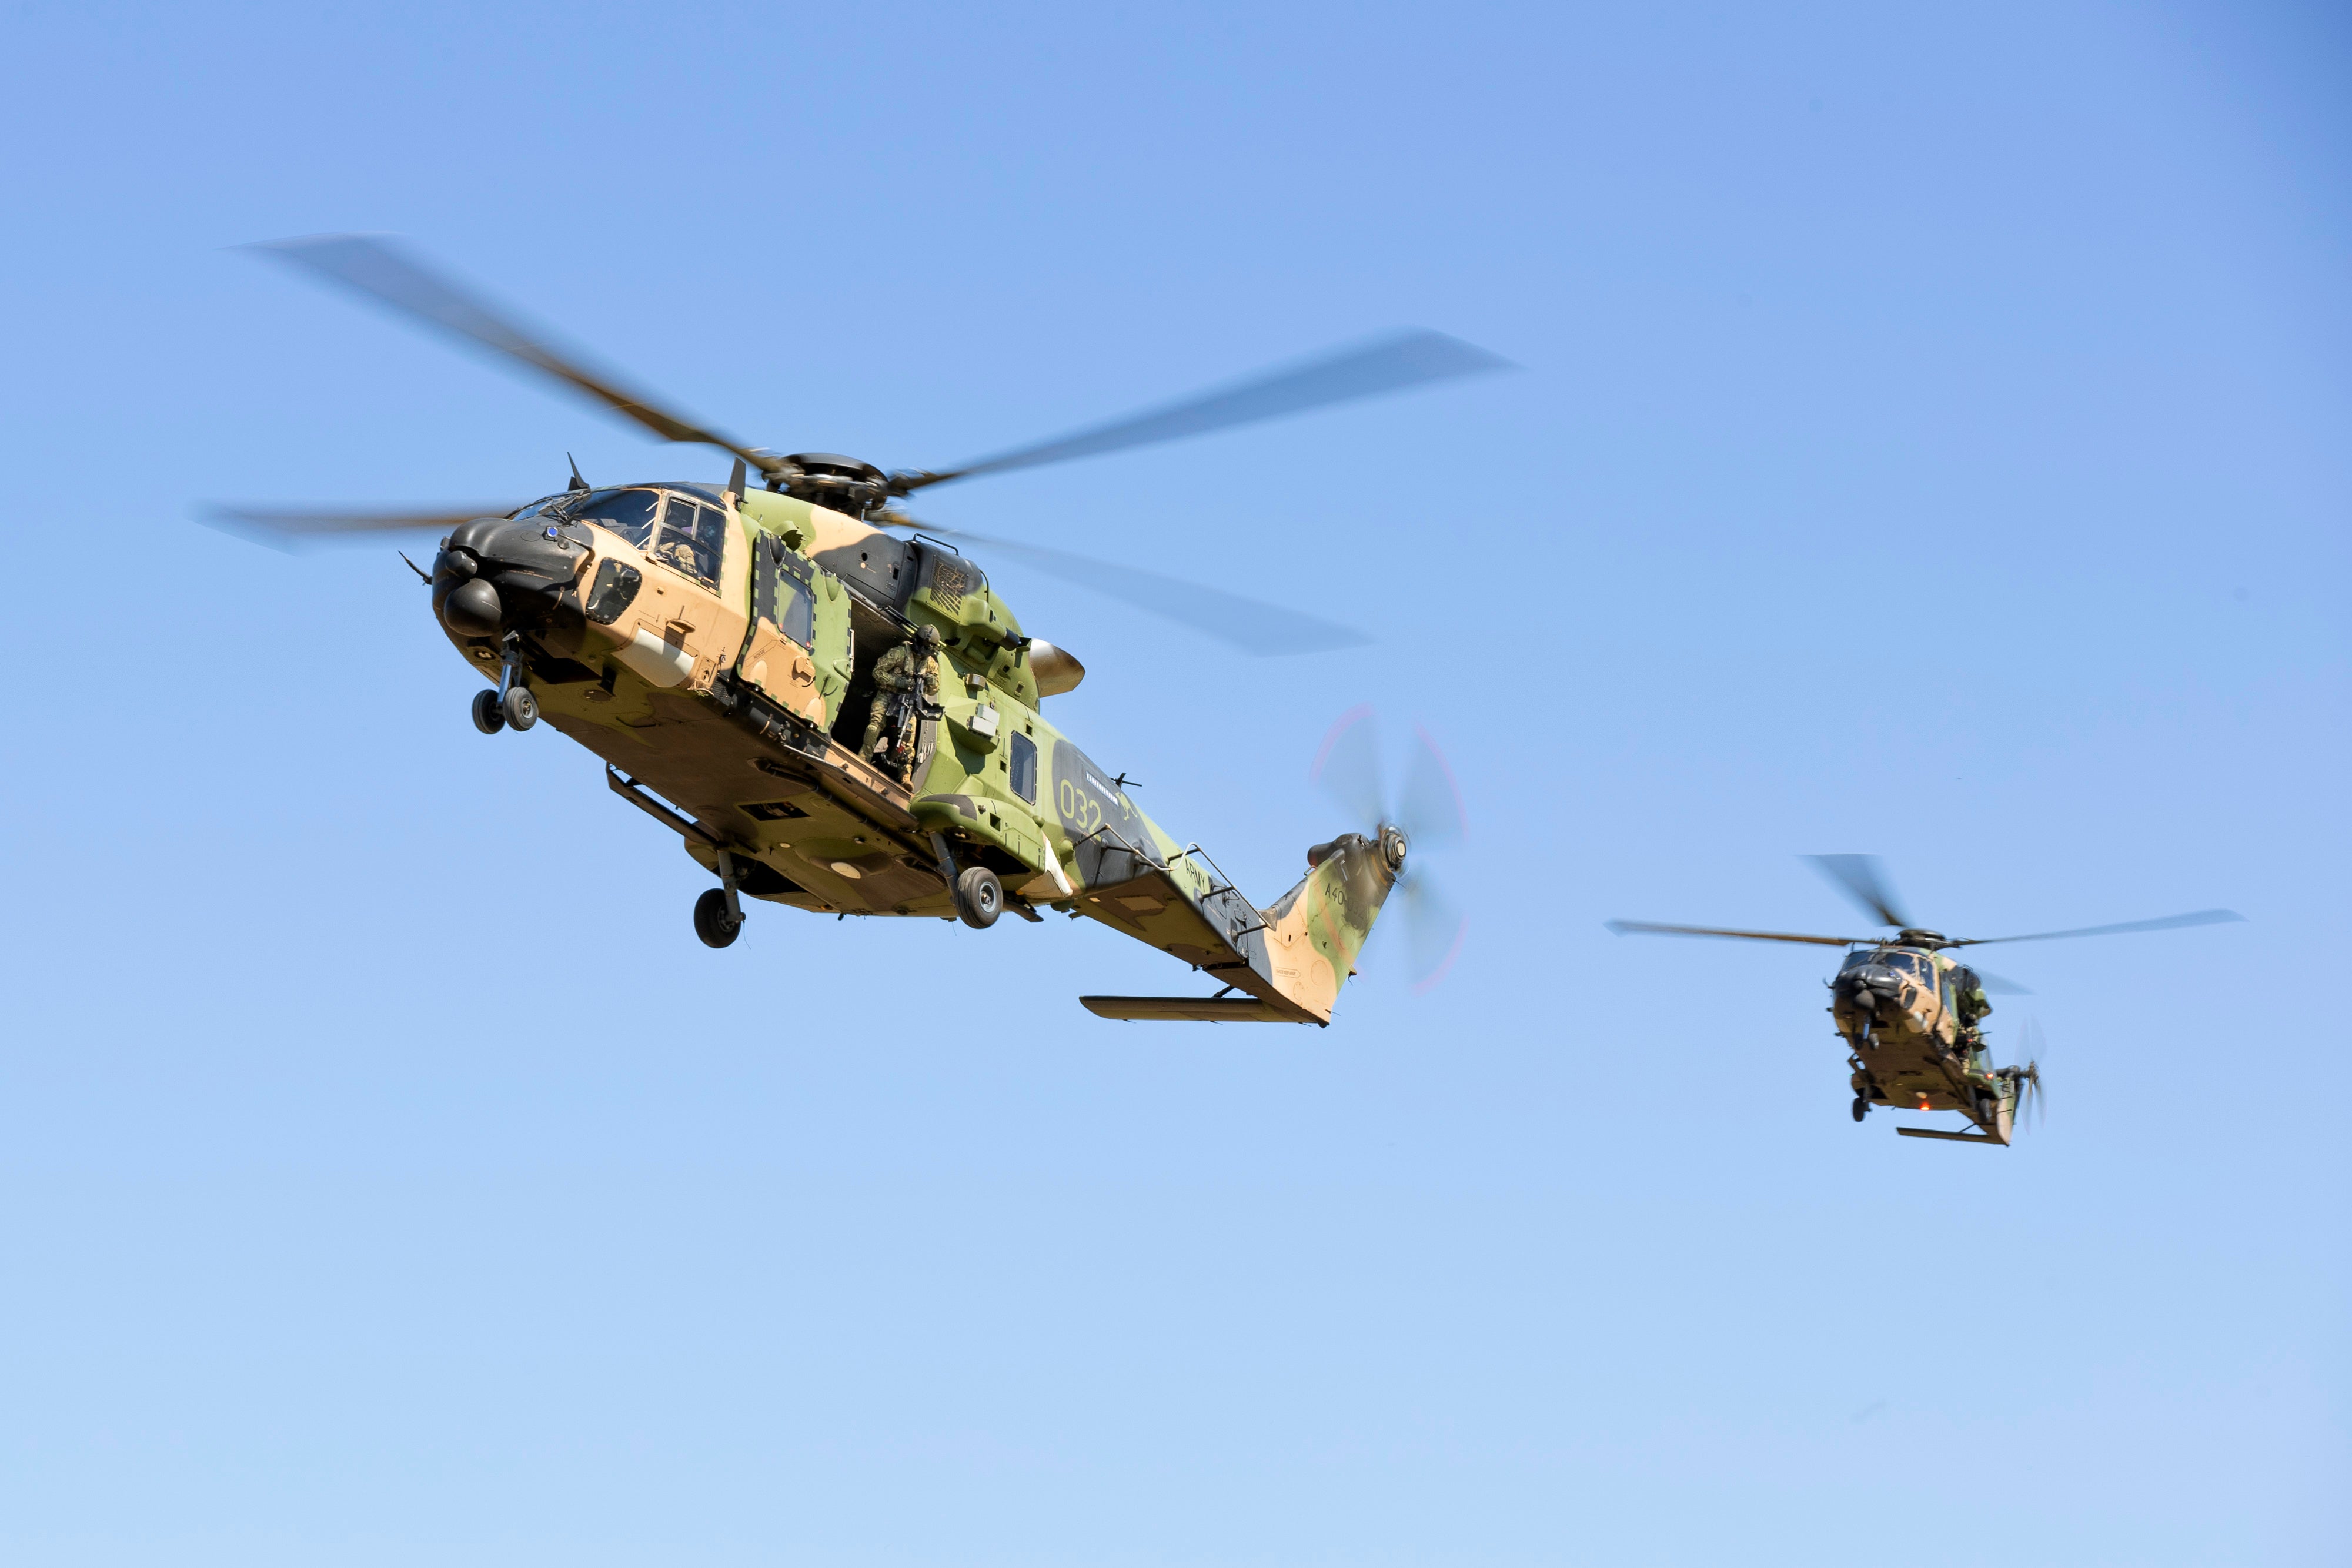 Army MRH-90 Taipan helicopters prepare to land at Townsville, Australia